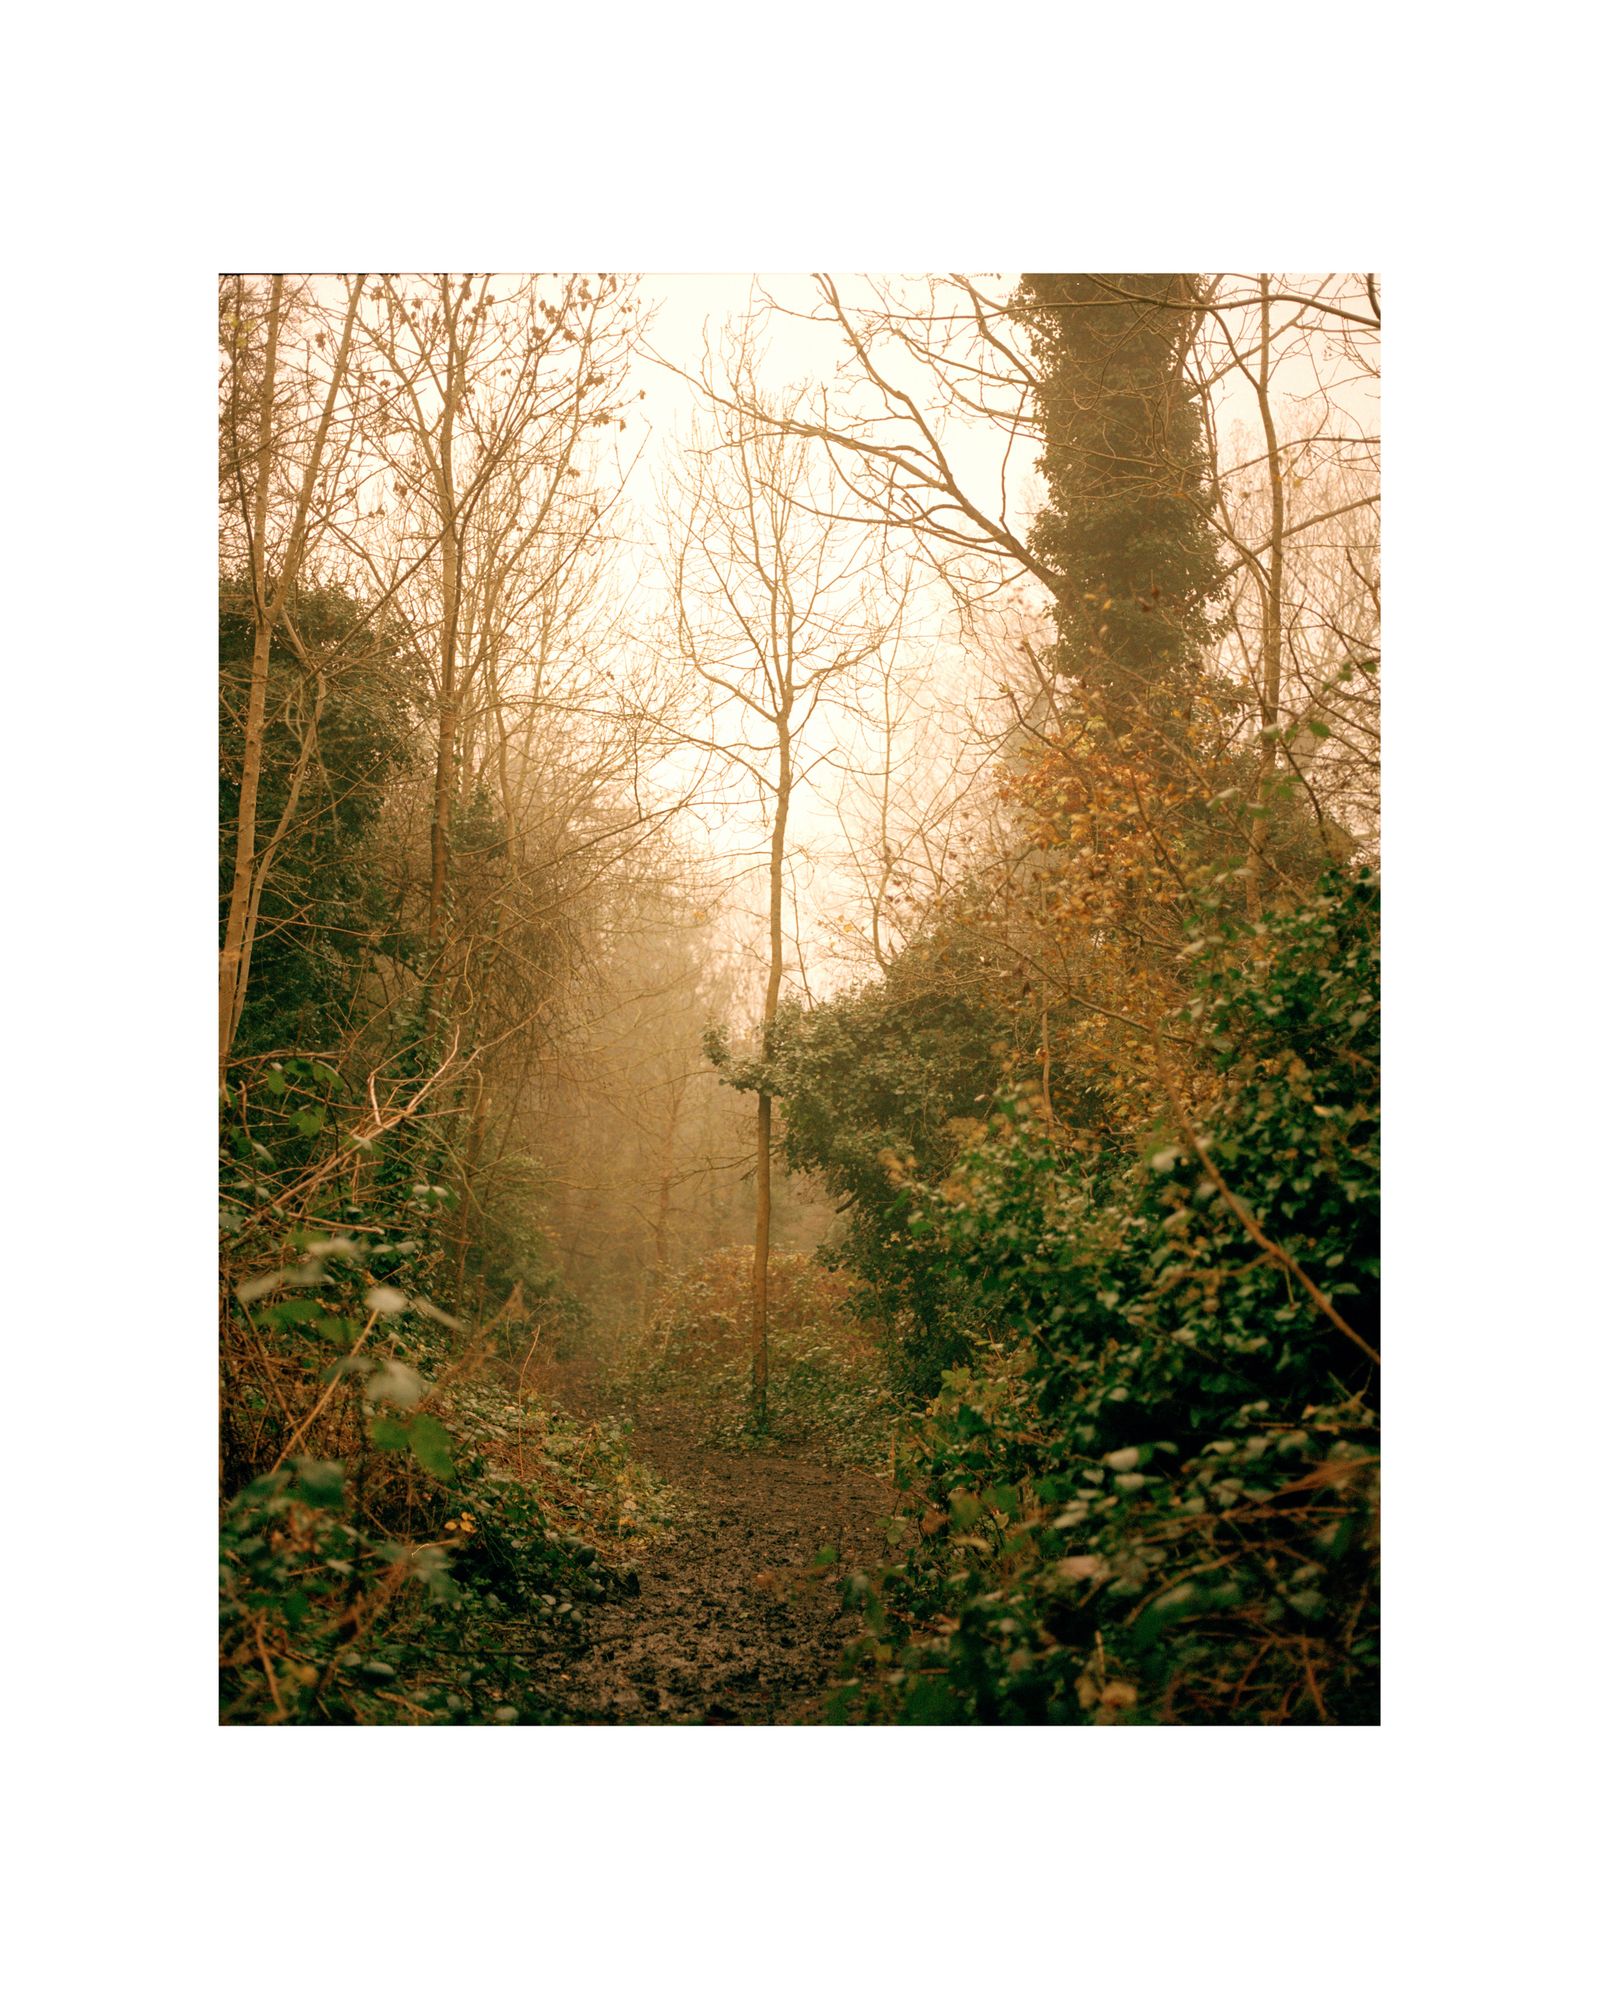 © George Selley - Image from the A Forest is Not a Free Market photography project